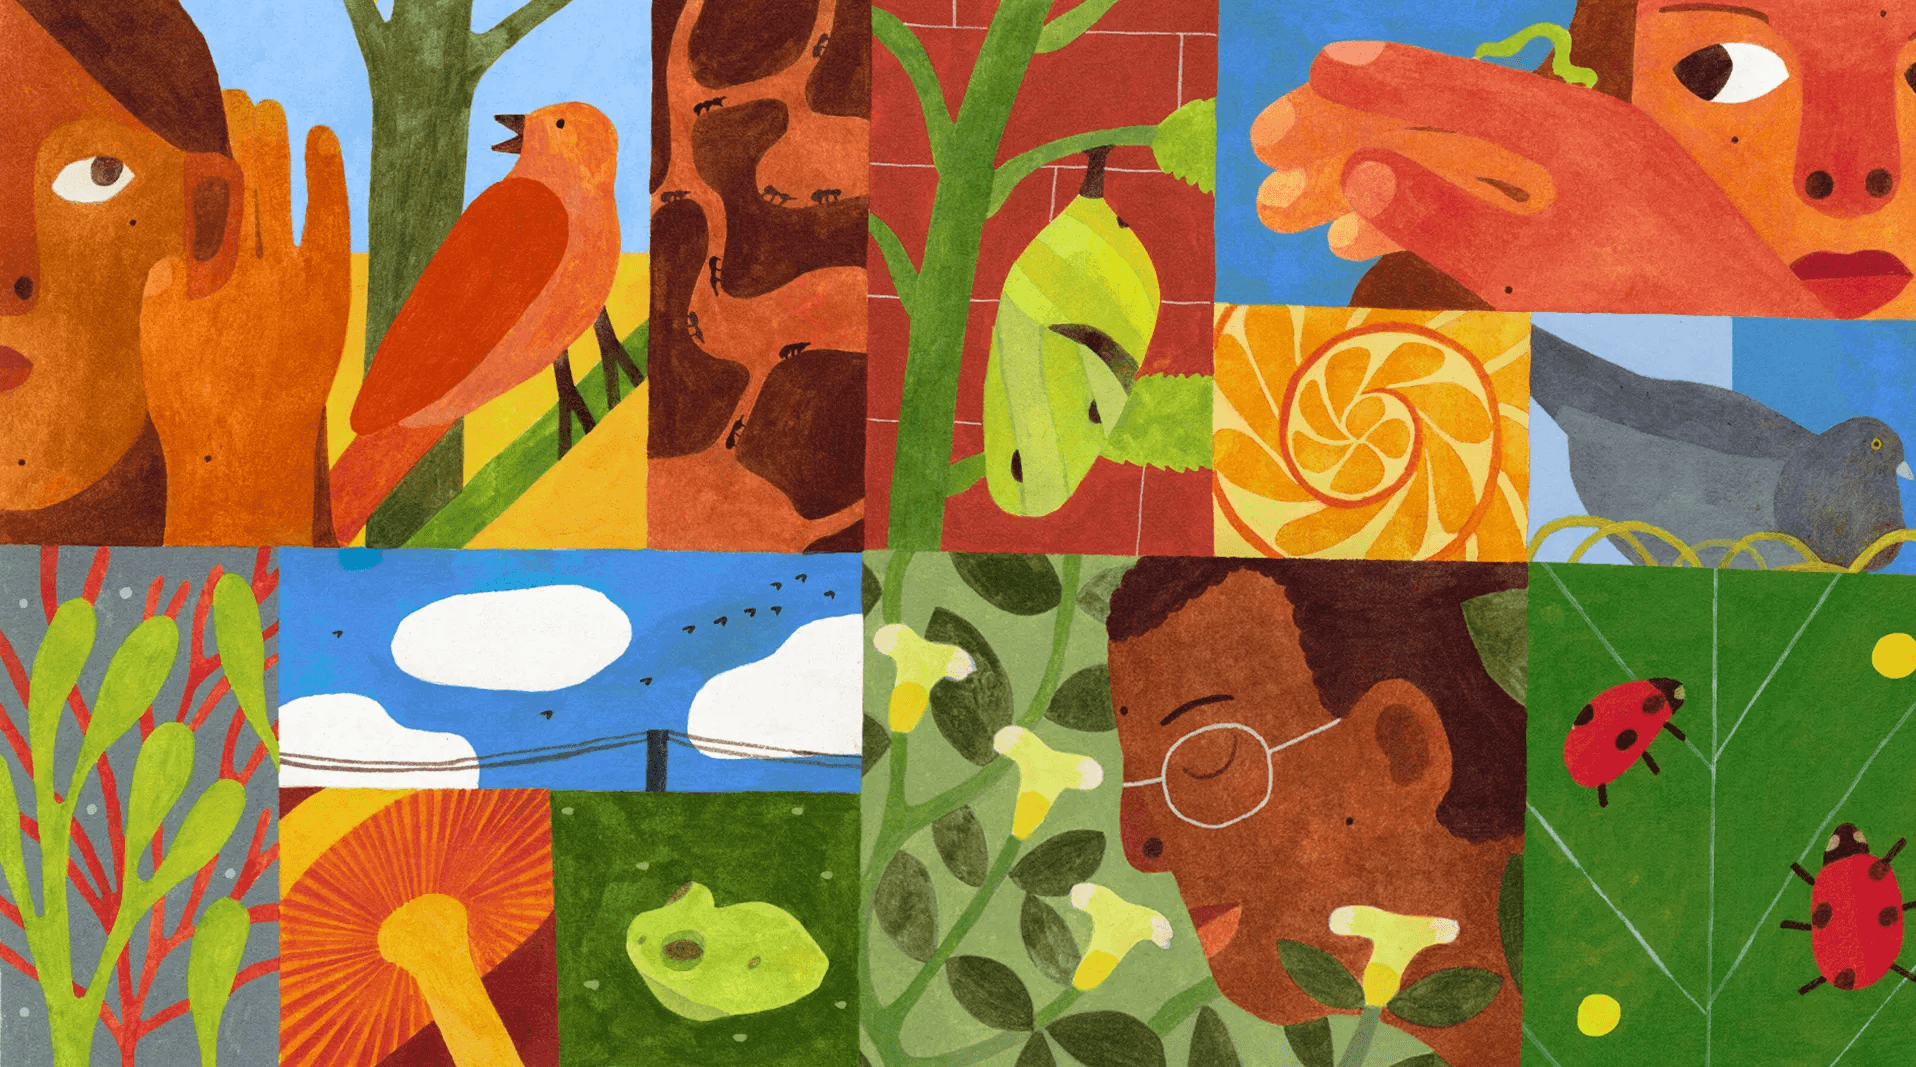 Brightly-colored Spring-themed illustrations with people, insects, birds, plants, and other wildlife